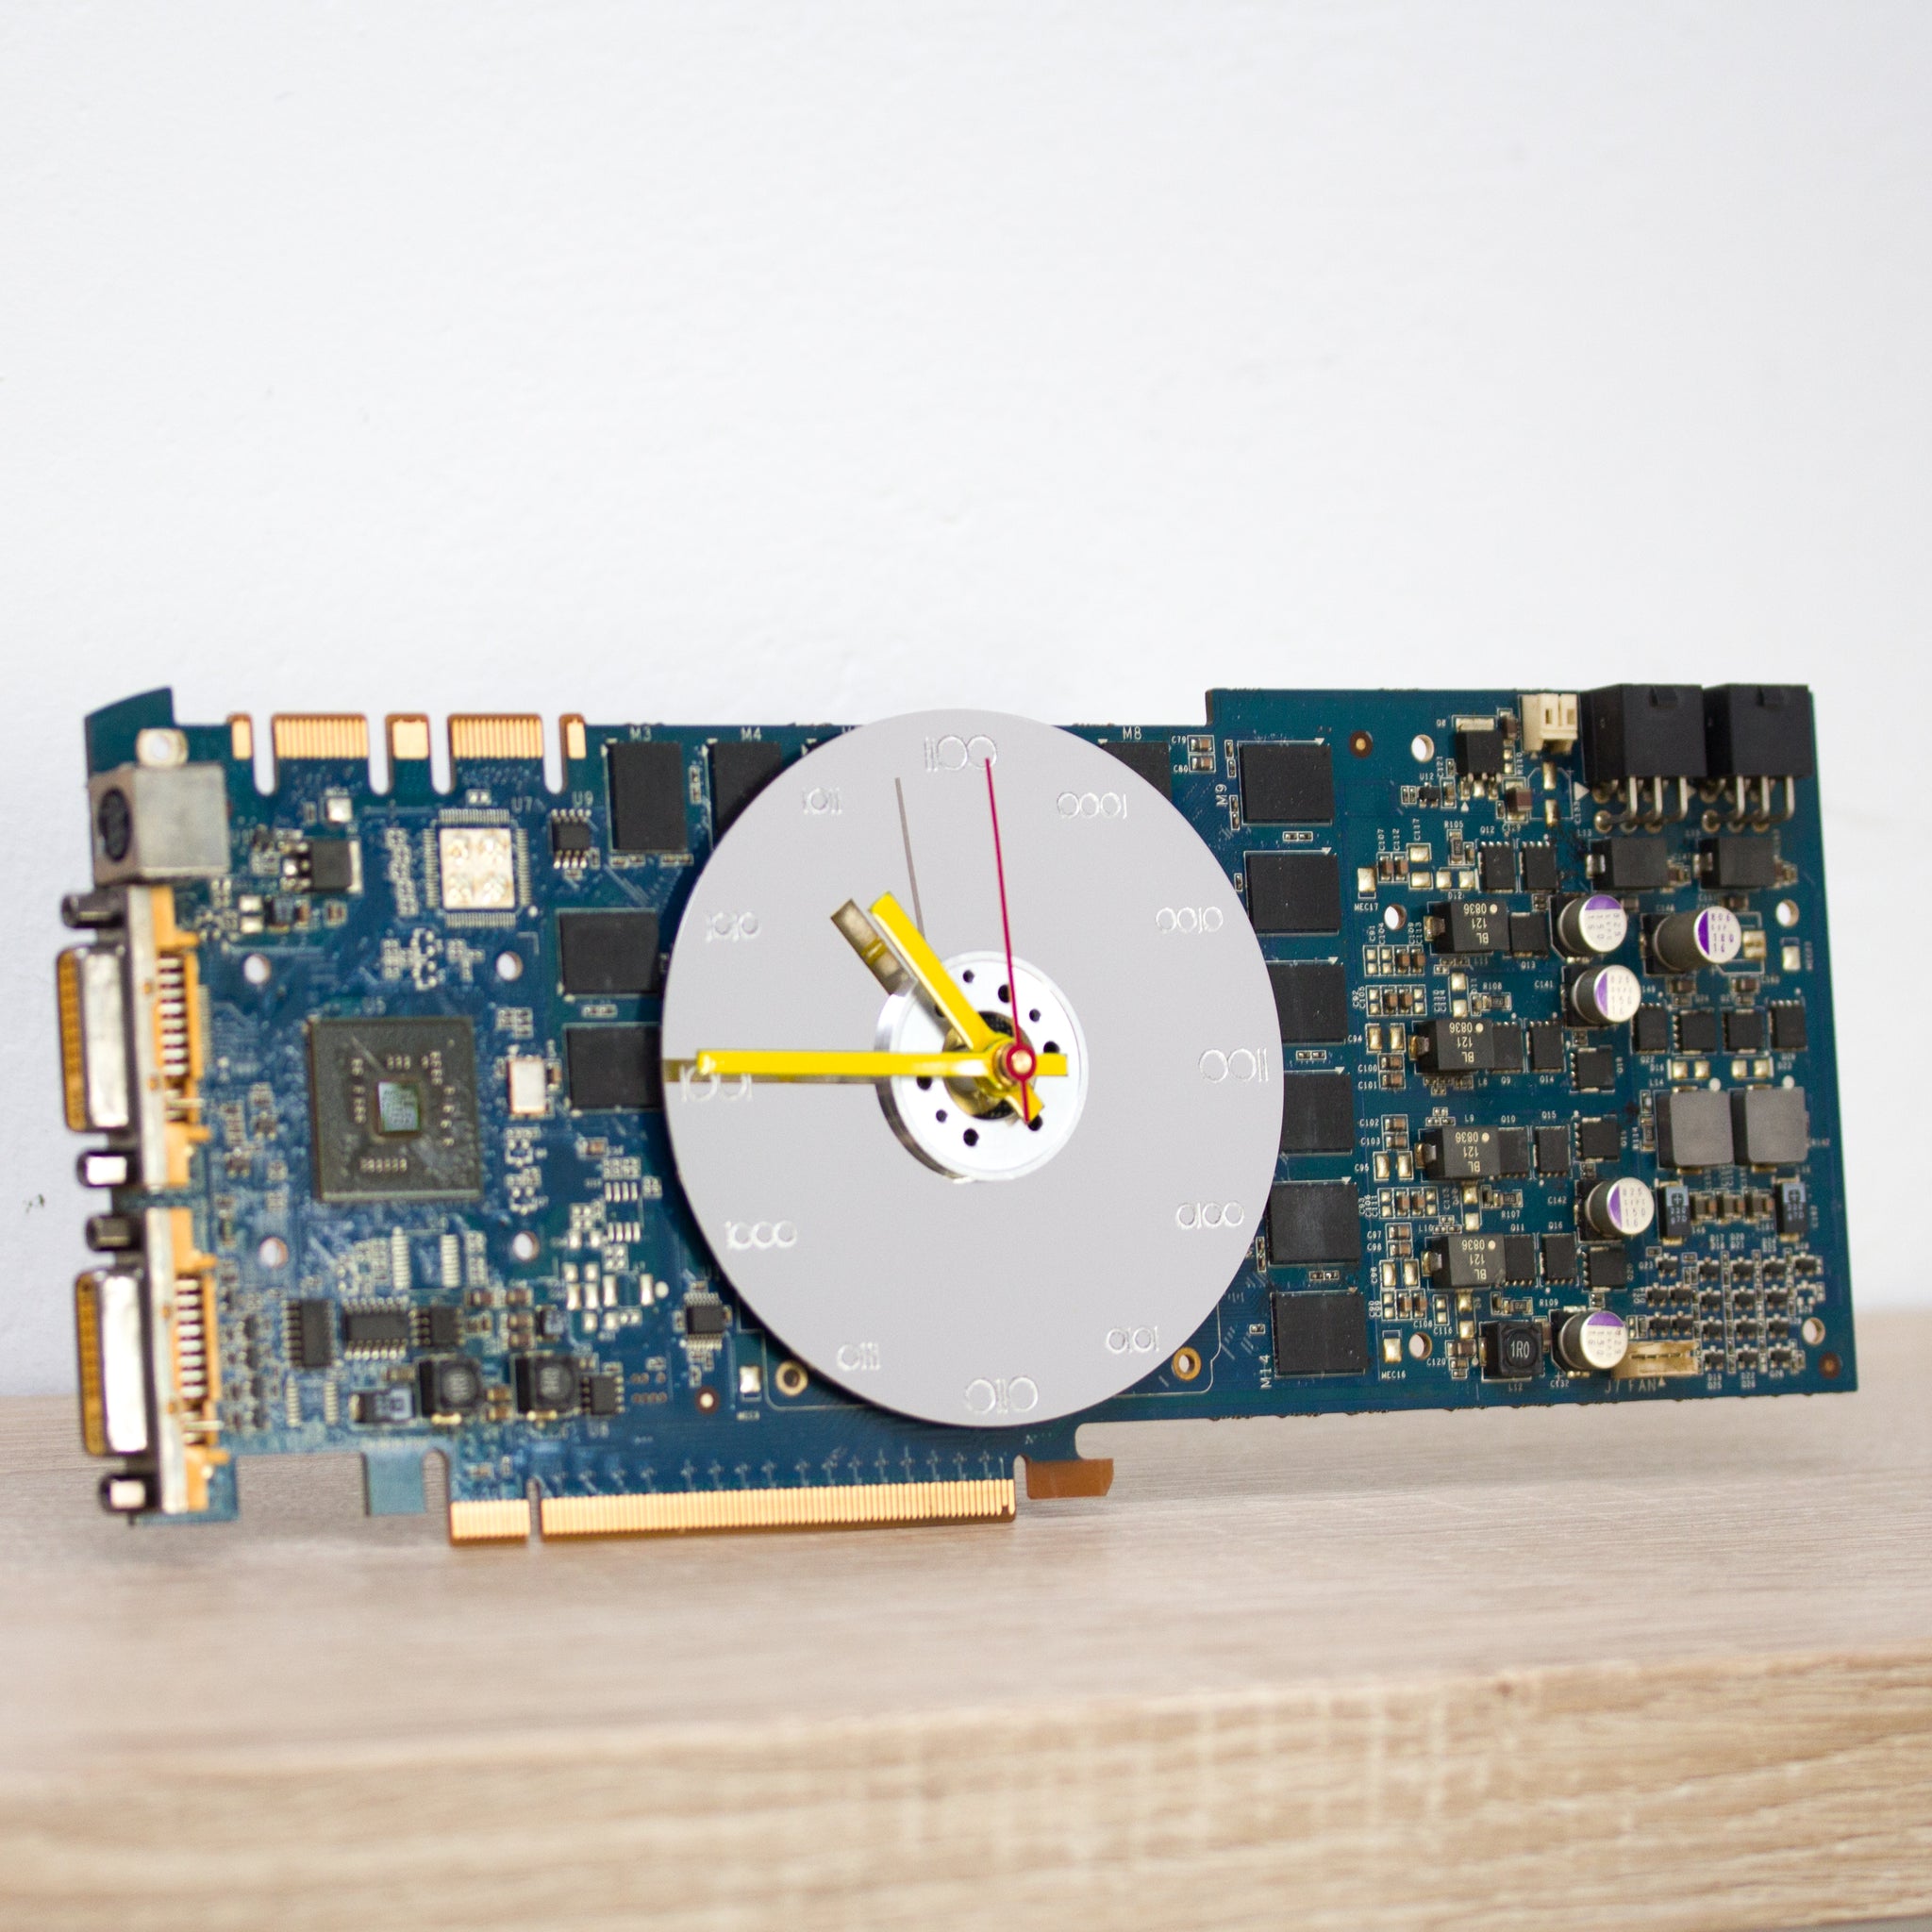 Desk clock - unique office clock, Recycled video card clock, gift for geek, techie decor - blue circuit board